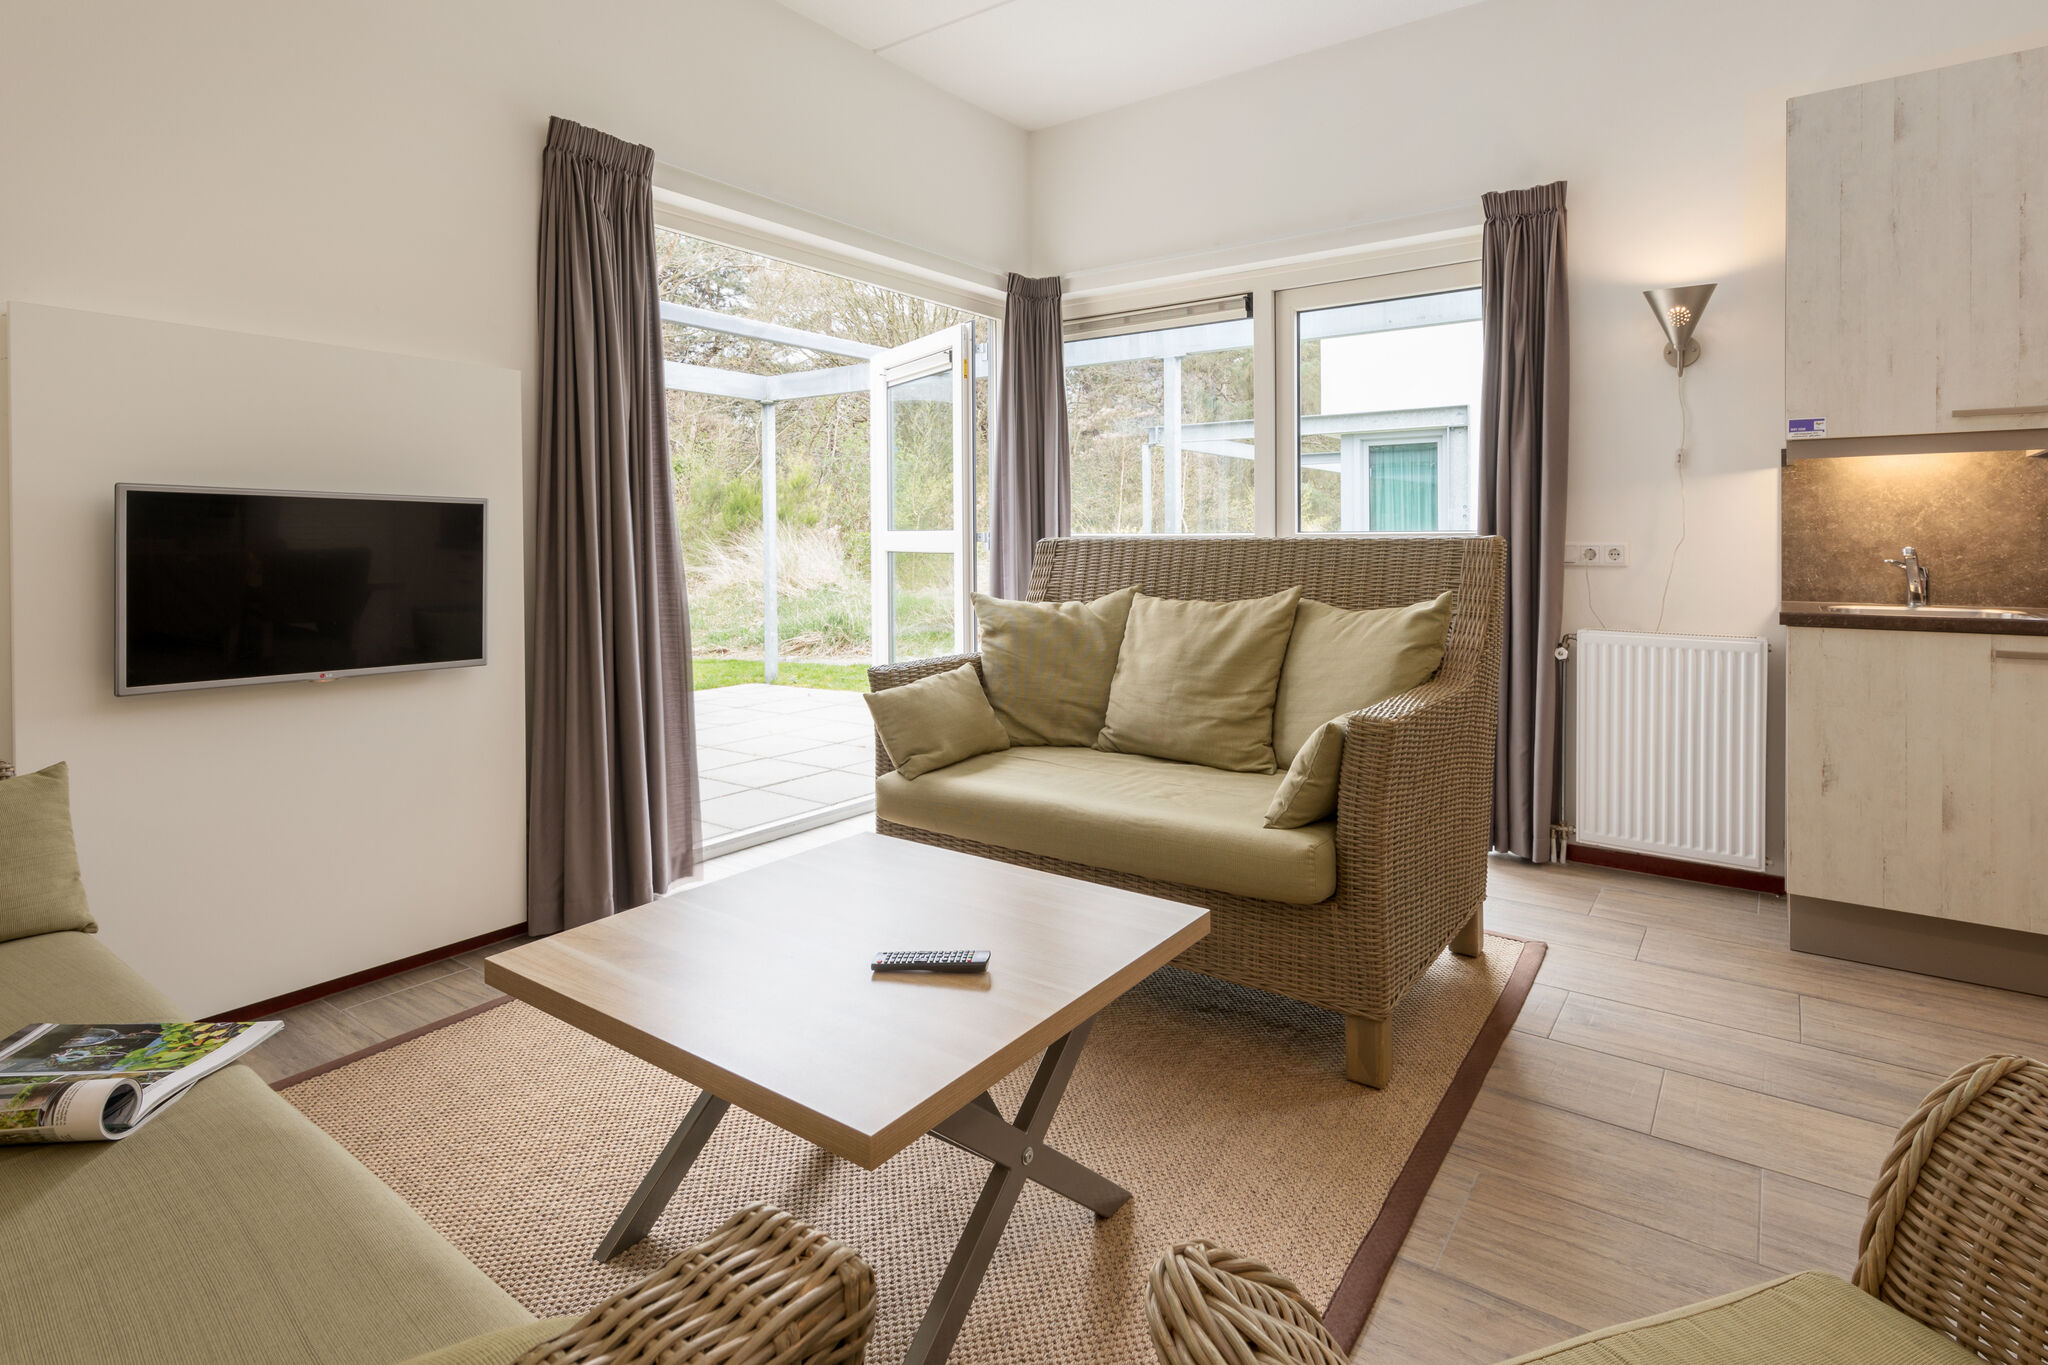 Luxury chalet with two bathrooms, 2 km from the sea on Texel